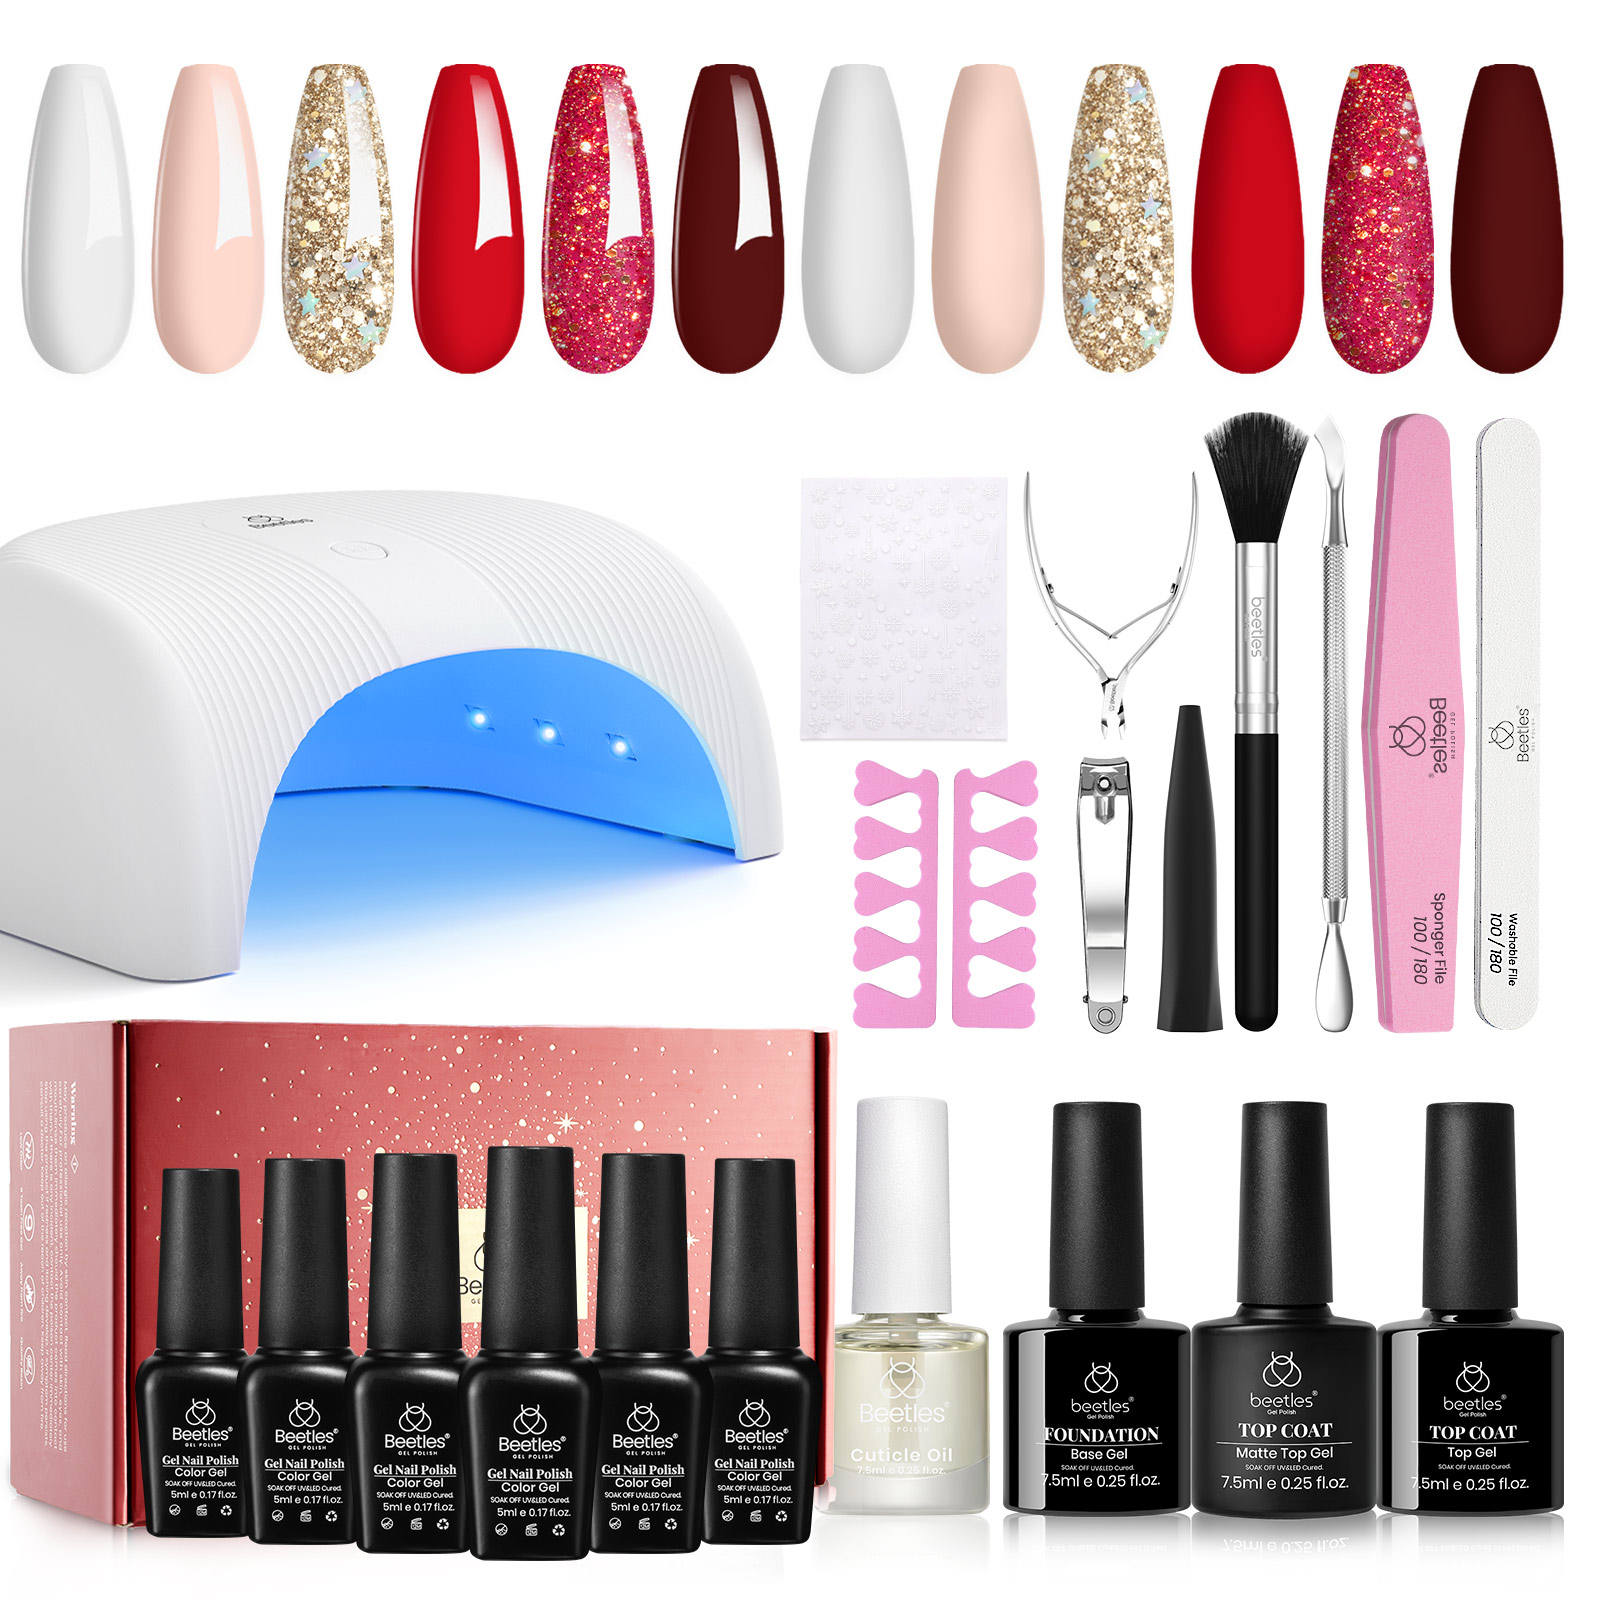 All-in-one Nail Starter Kit Gel Manicure Gift Box with 6 Shades#108